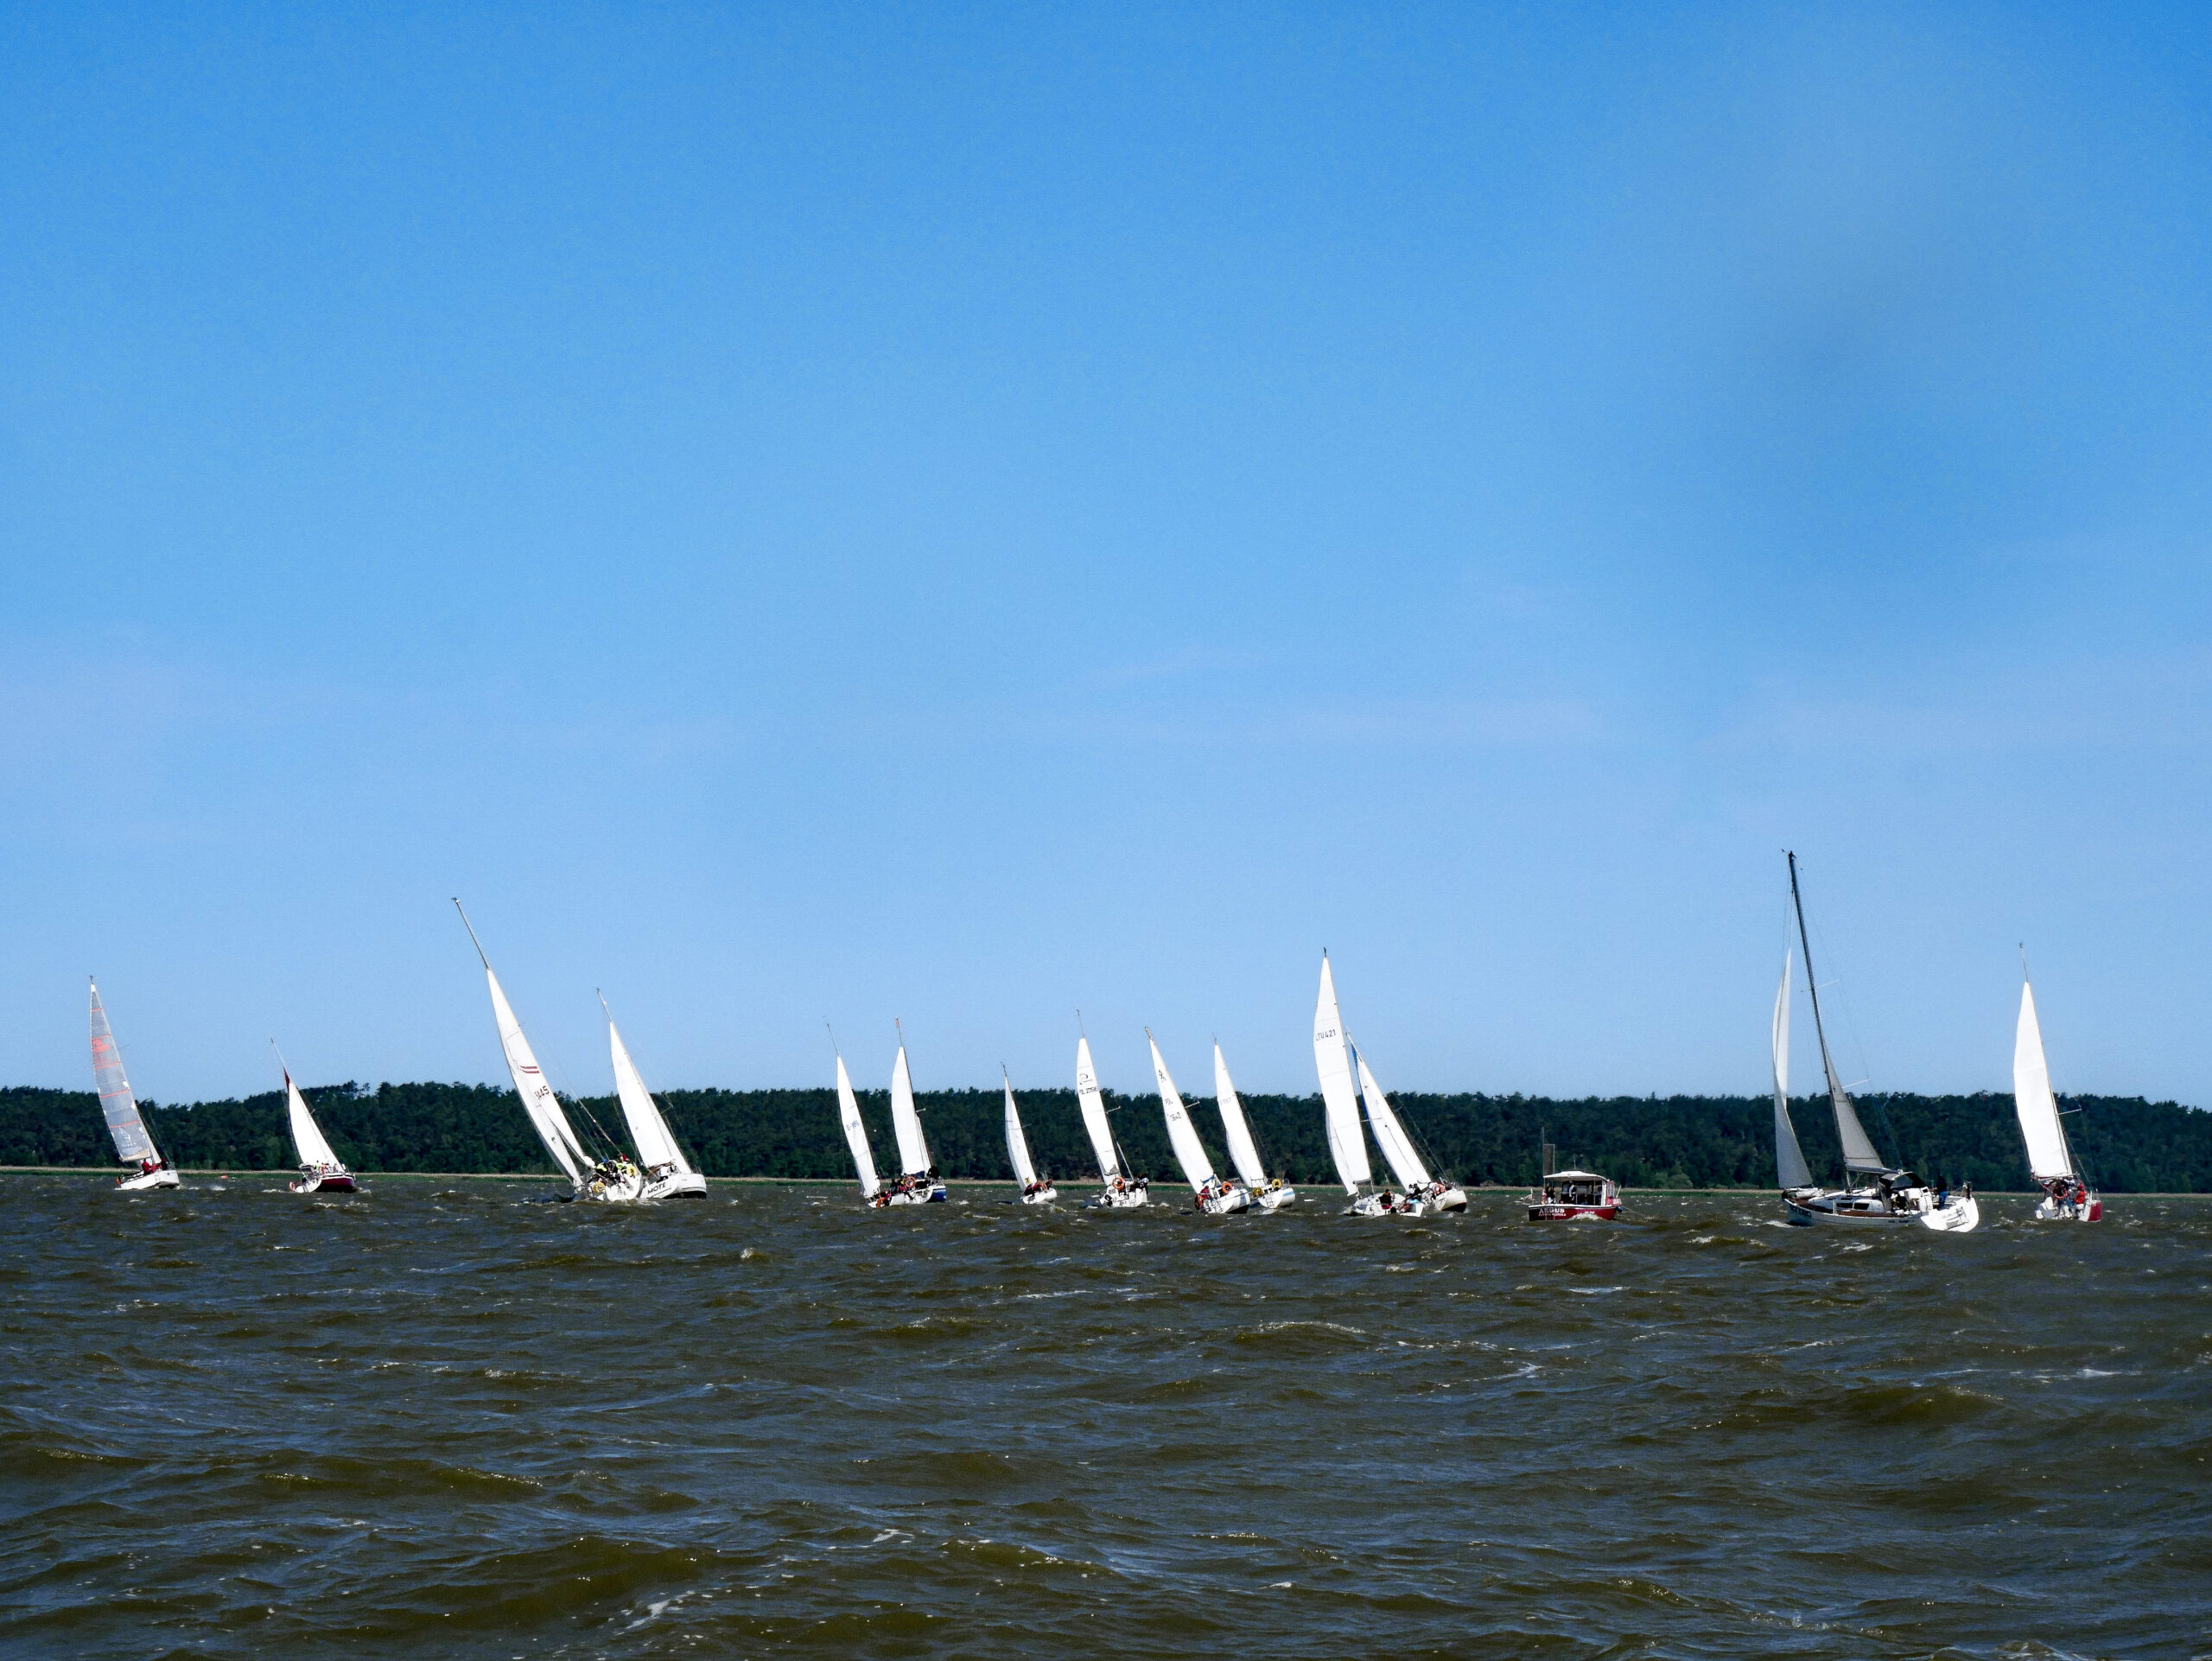 The Regatta for the Marshal’s Cup as every year on the Vistula Lagoon